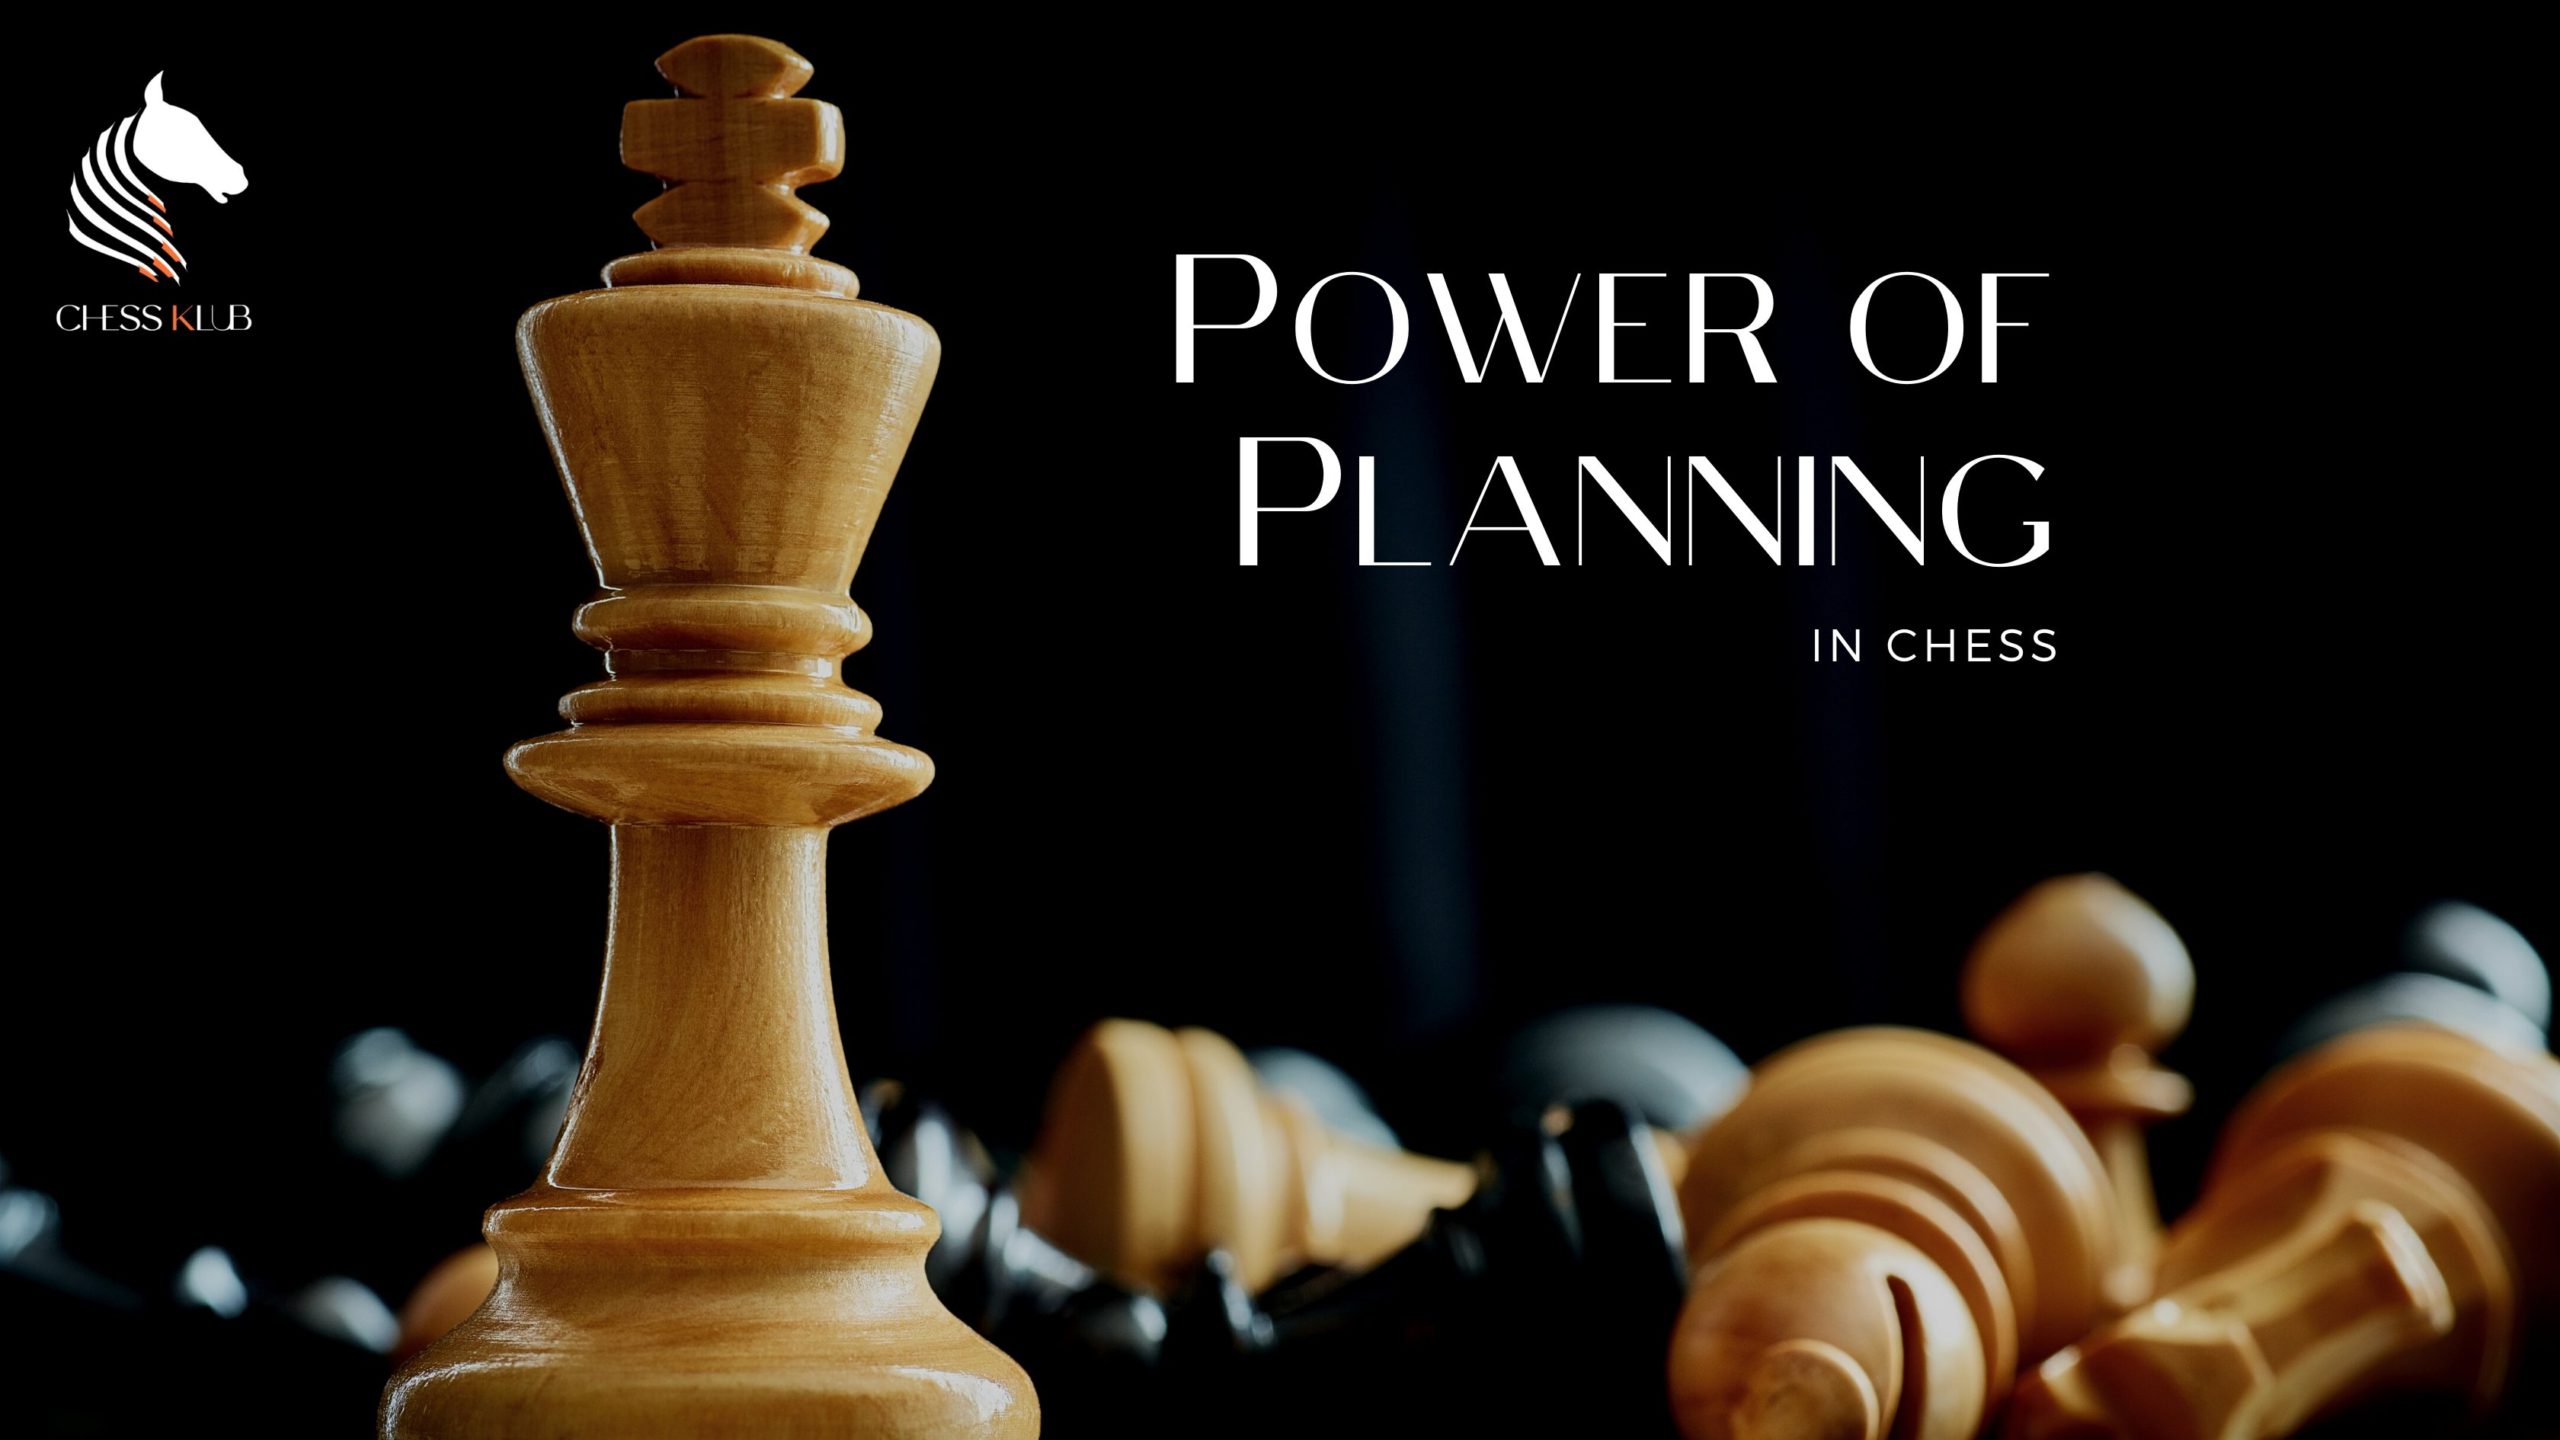 The Power of Planning in Chess